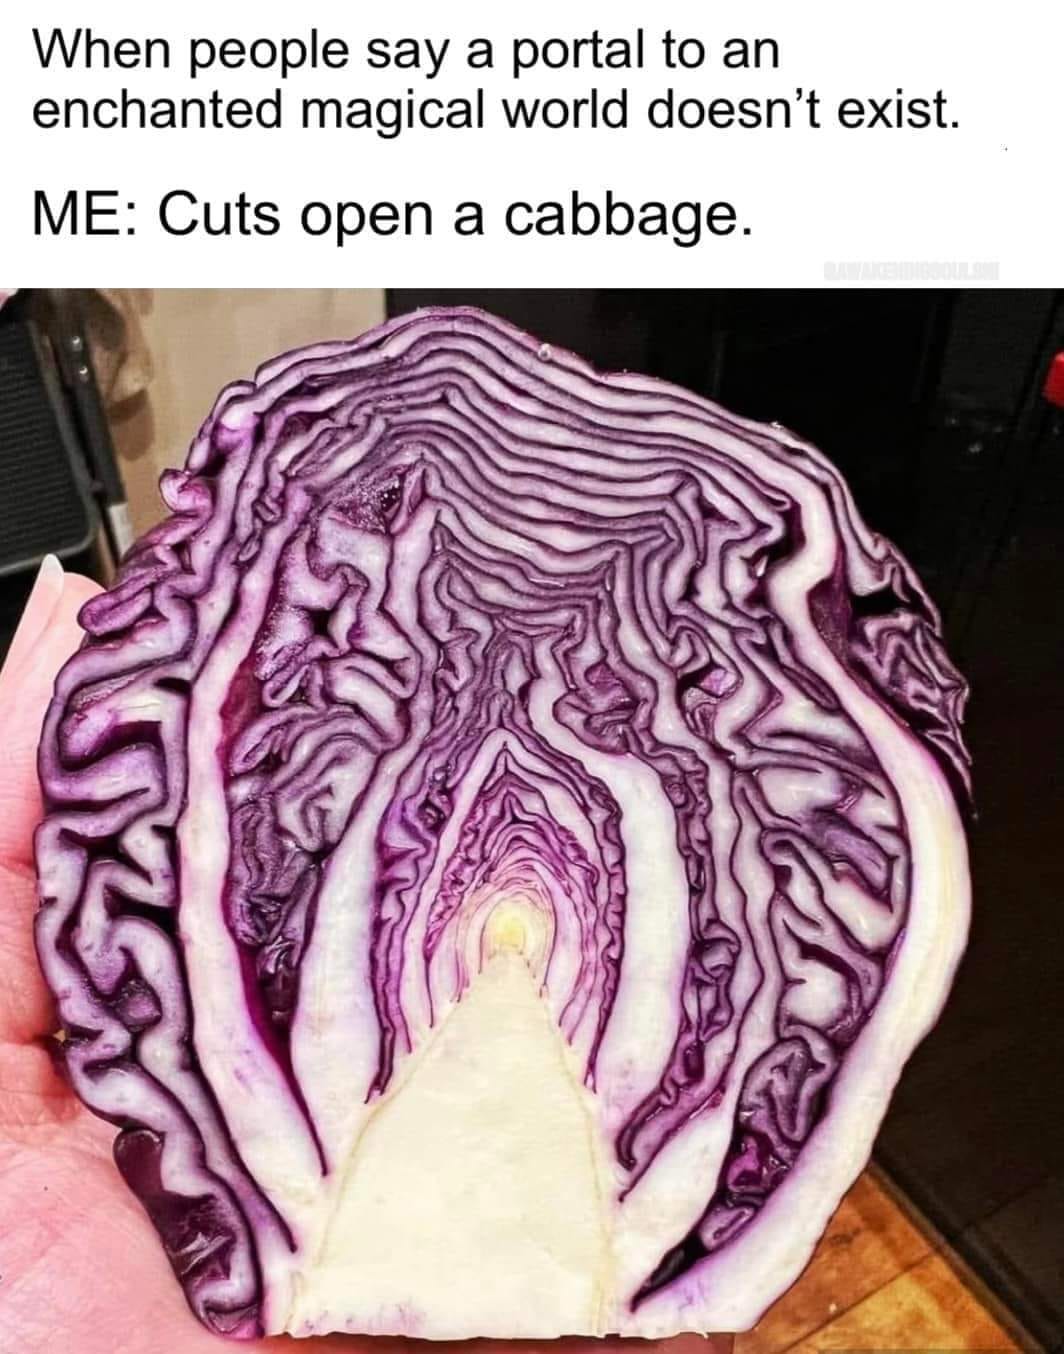 May be an image of text that says 'When people say a portal to an enchanted magical world doesn't exist. ME: Cuts open a cabbage.'